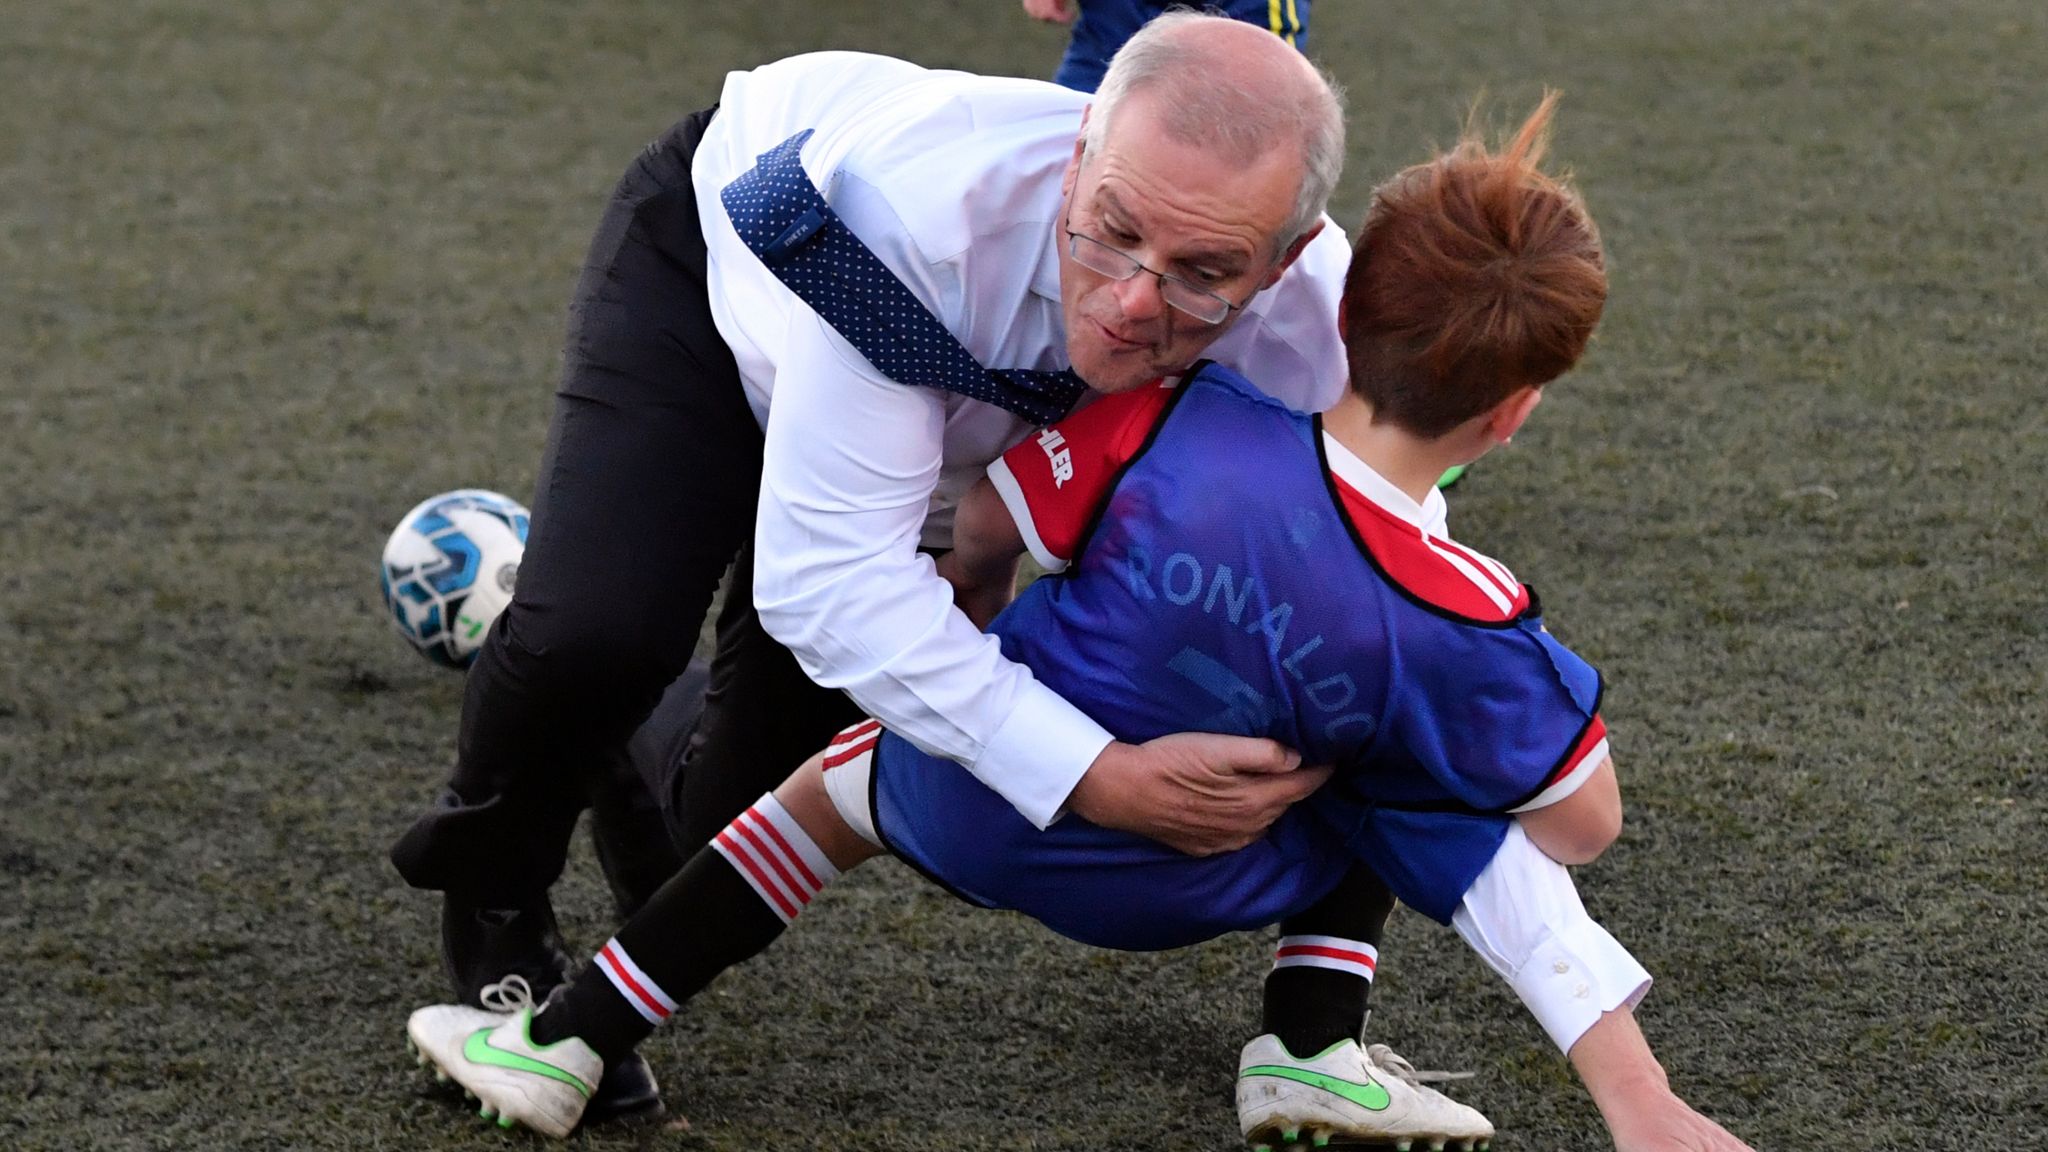 Australian PM Scott Morrison accidentally rugby tackles boy during football  match at election event | World News | Sky News